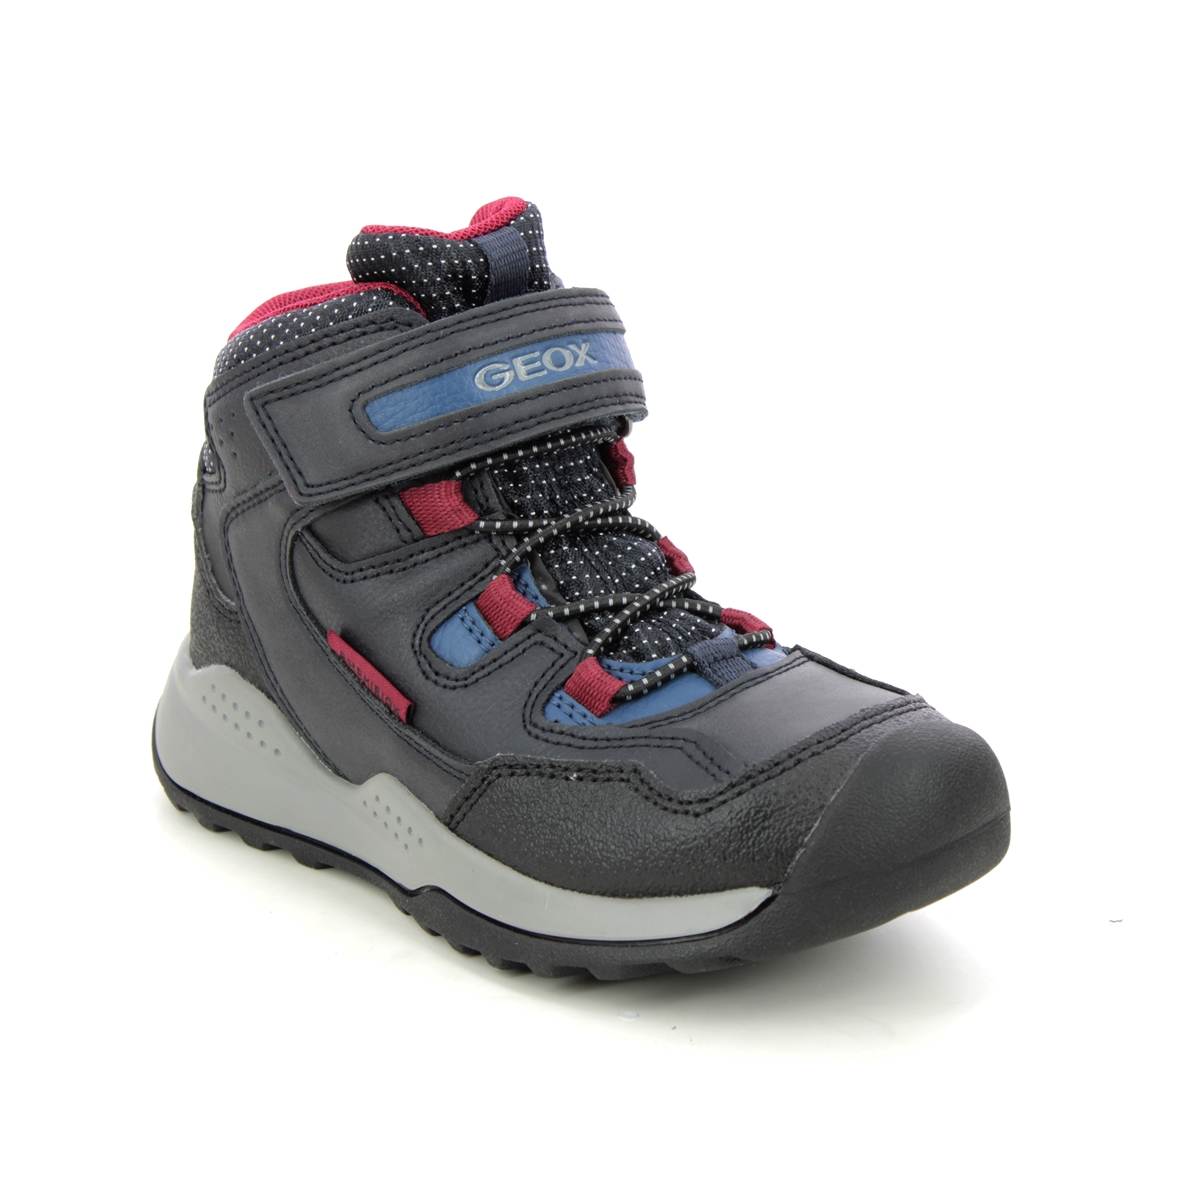 Geox Teram Tex Bungee Navy Red Kids boys boots J16AEA-C4244 in a Plain Man-made in Size 33